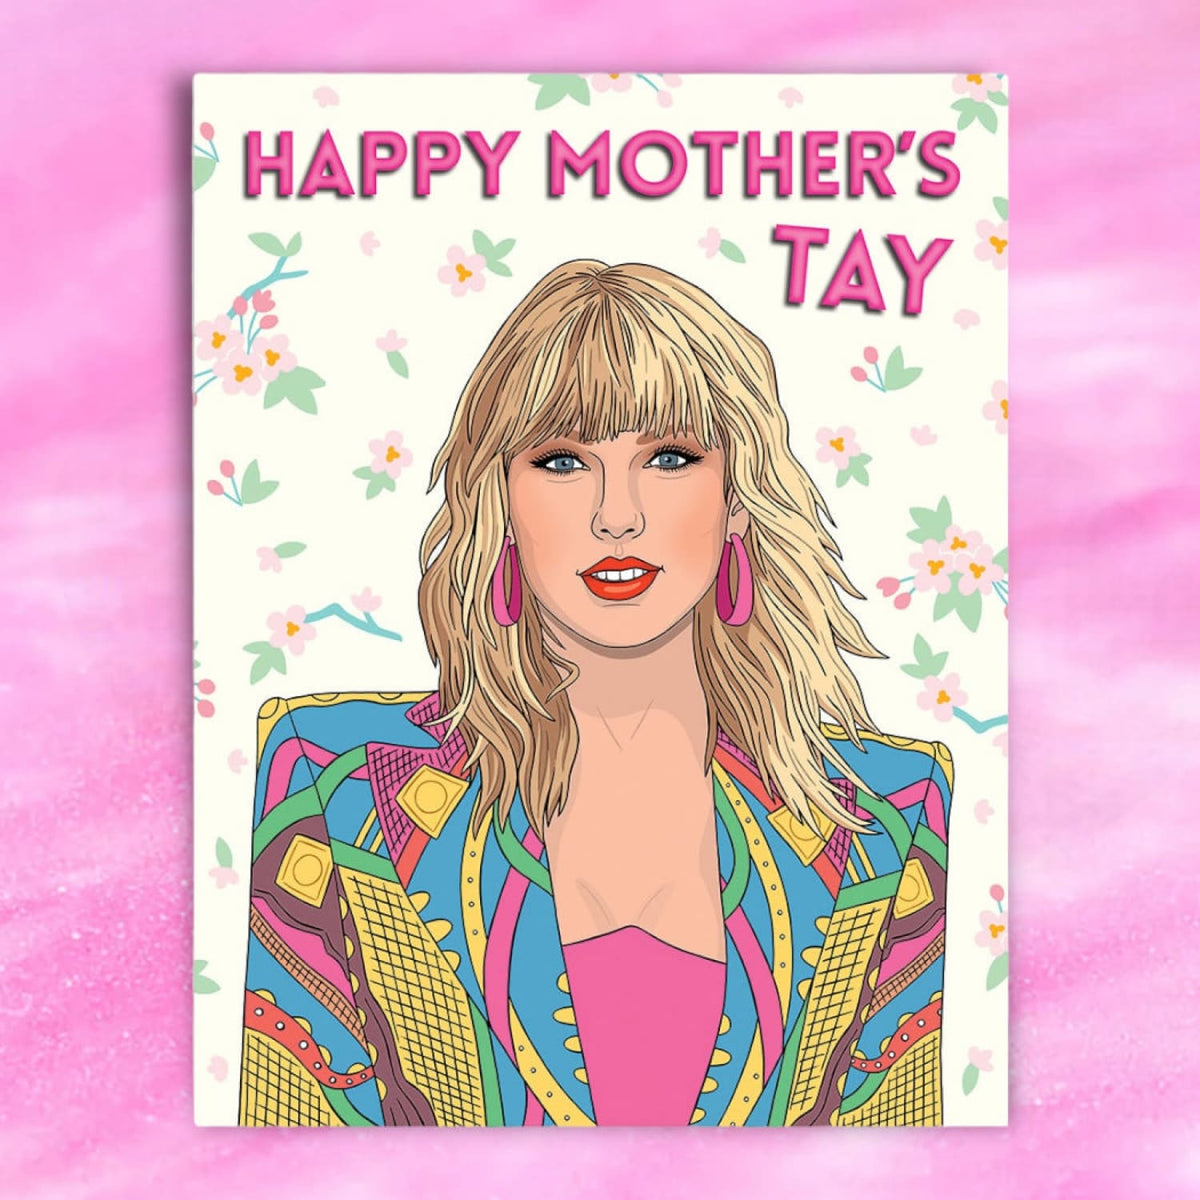 Happy Mother’s Tay Greeting Card - Lgbtq Owned Made